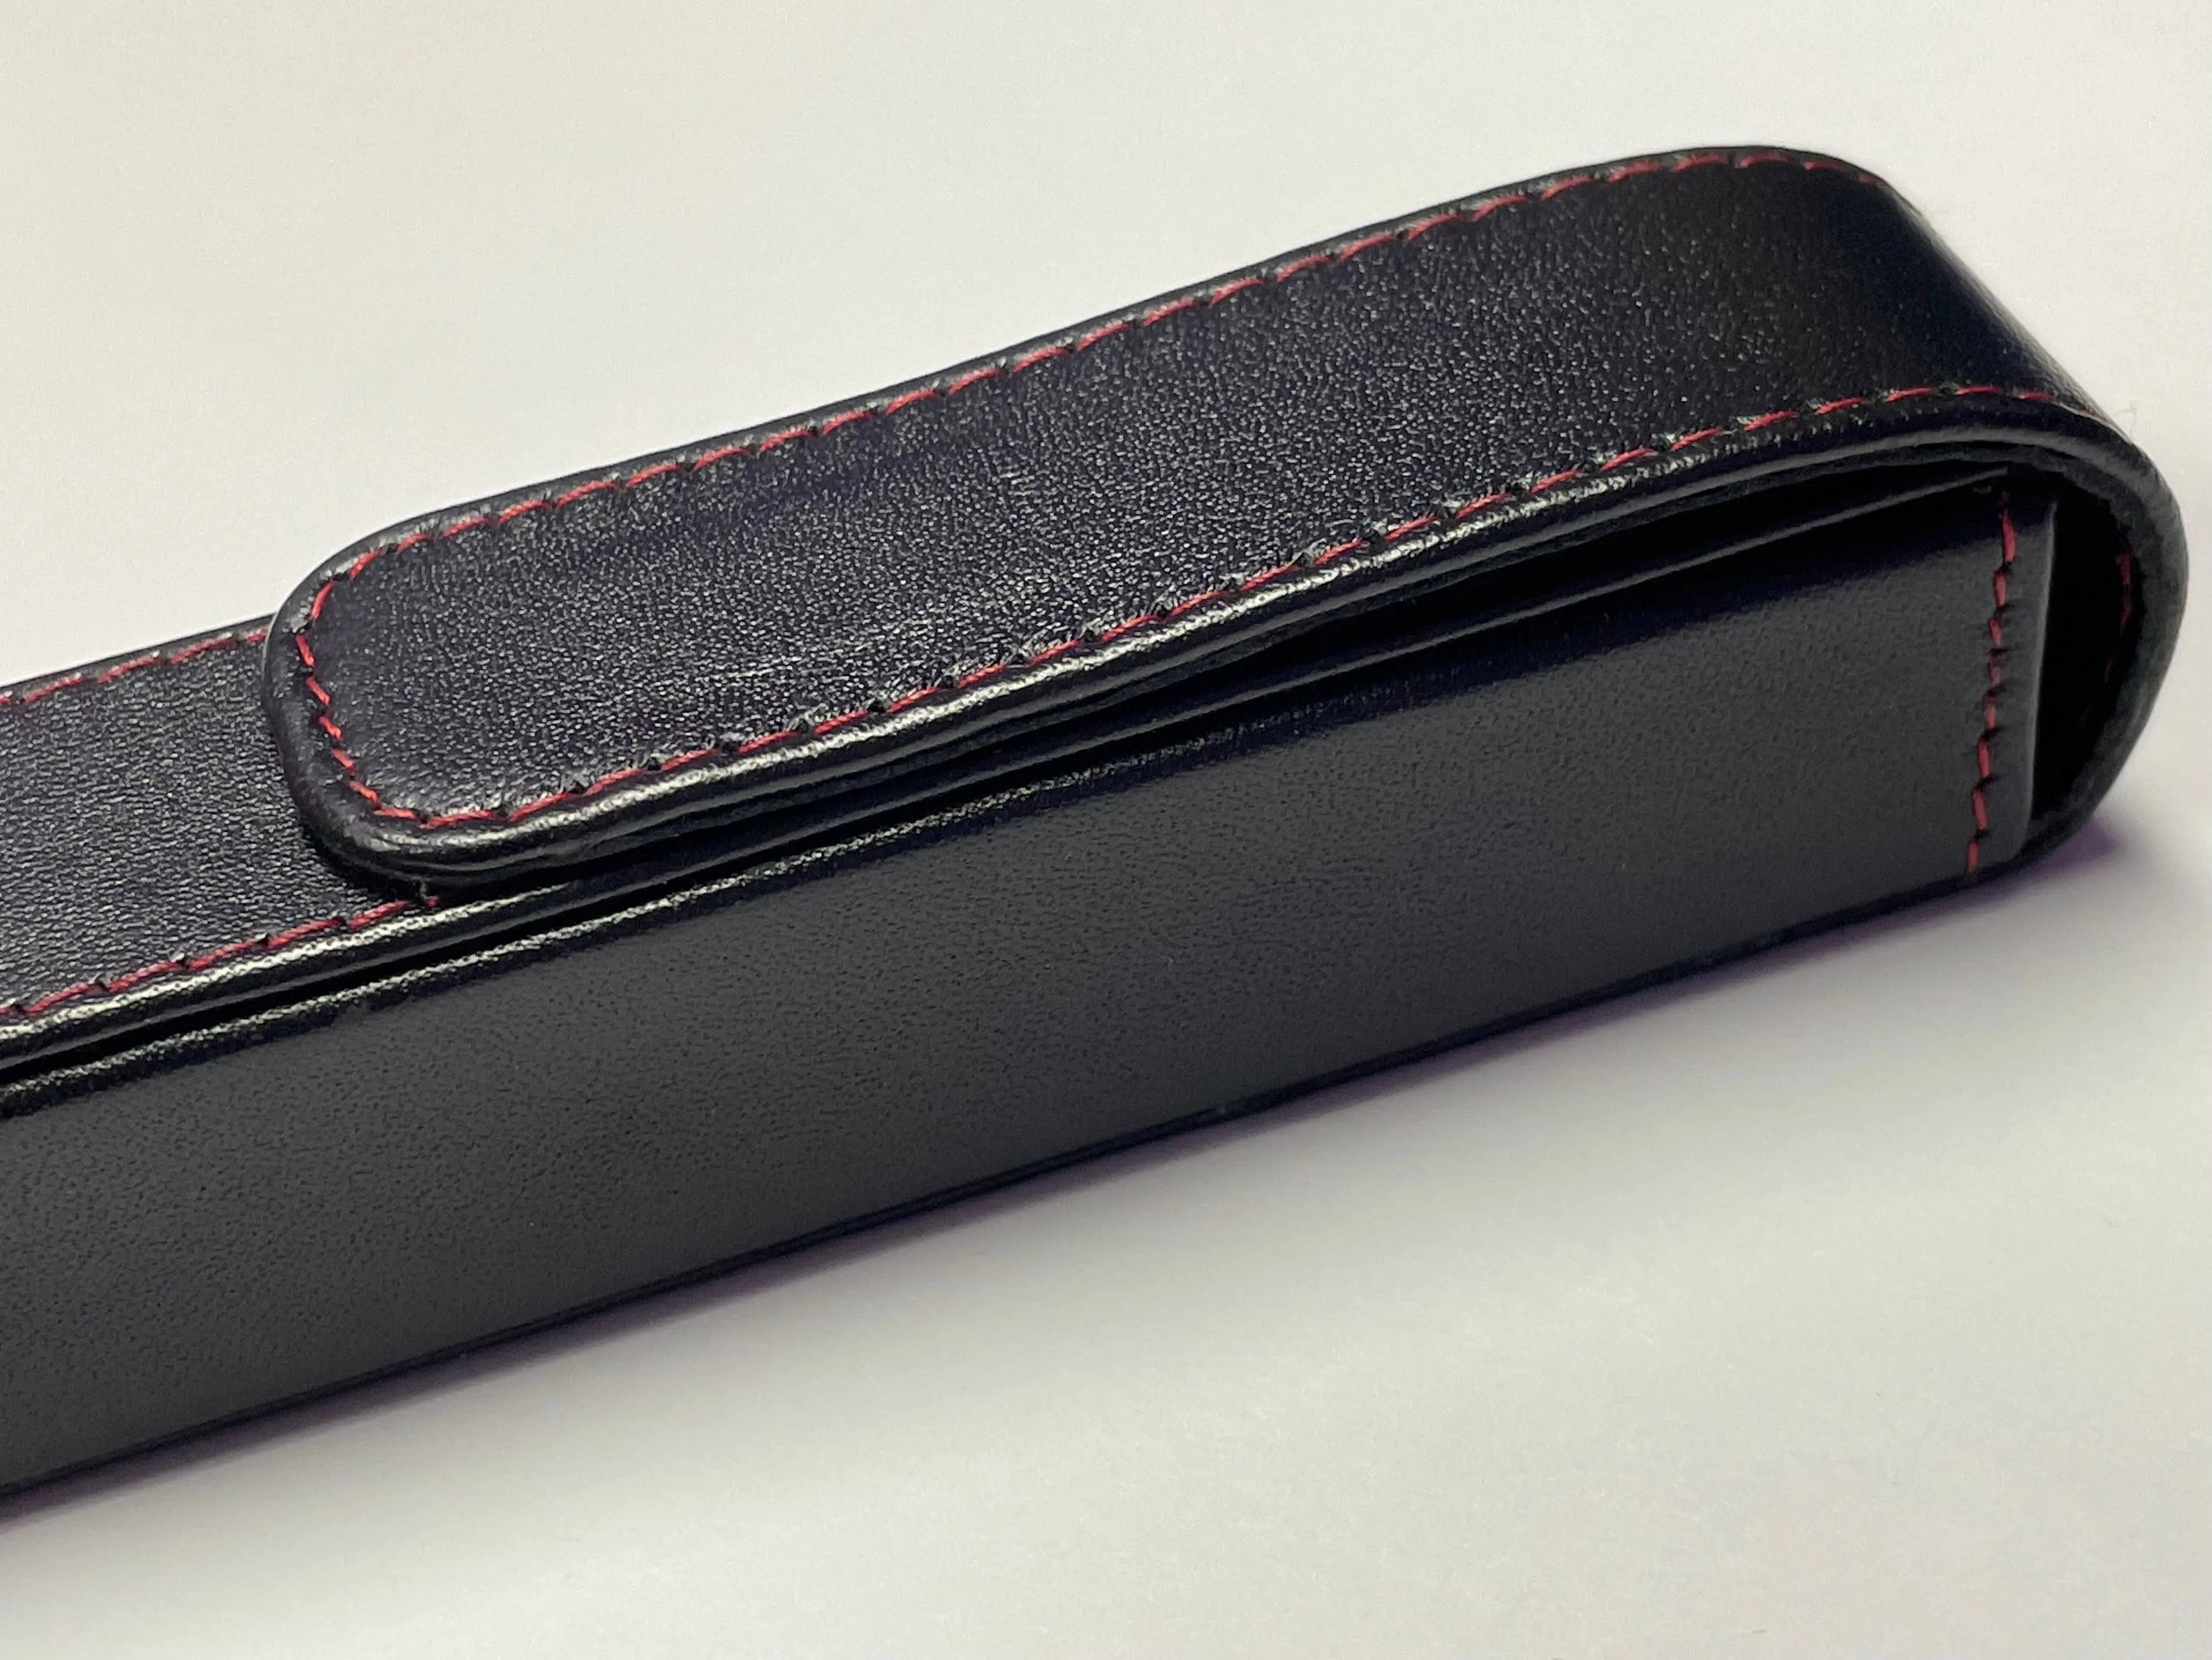 Pen Boutique Yak Leather Single Pen Box - Black with Red Stitching - Magnetic Closure Yak Leather